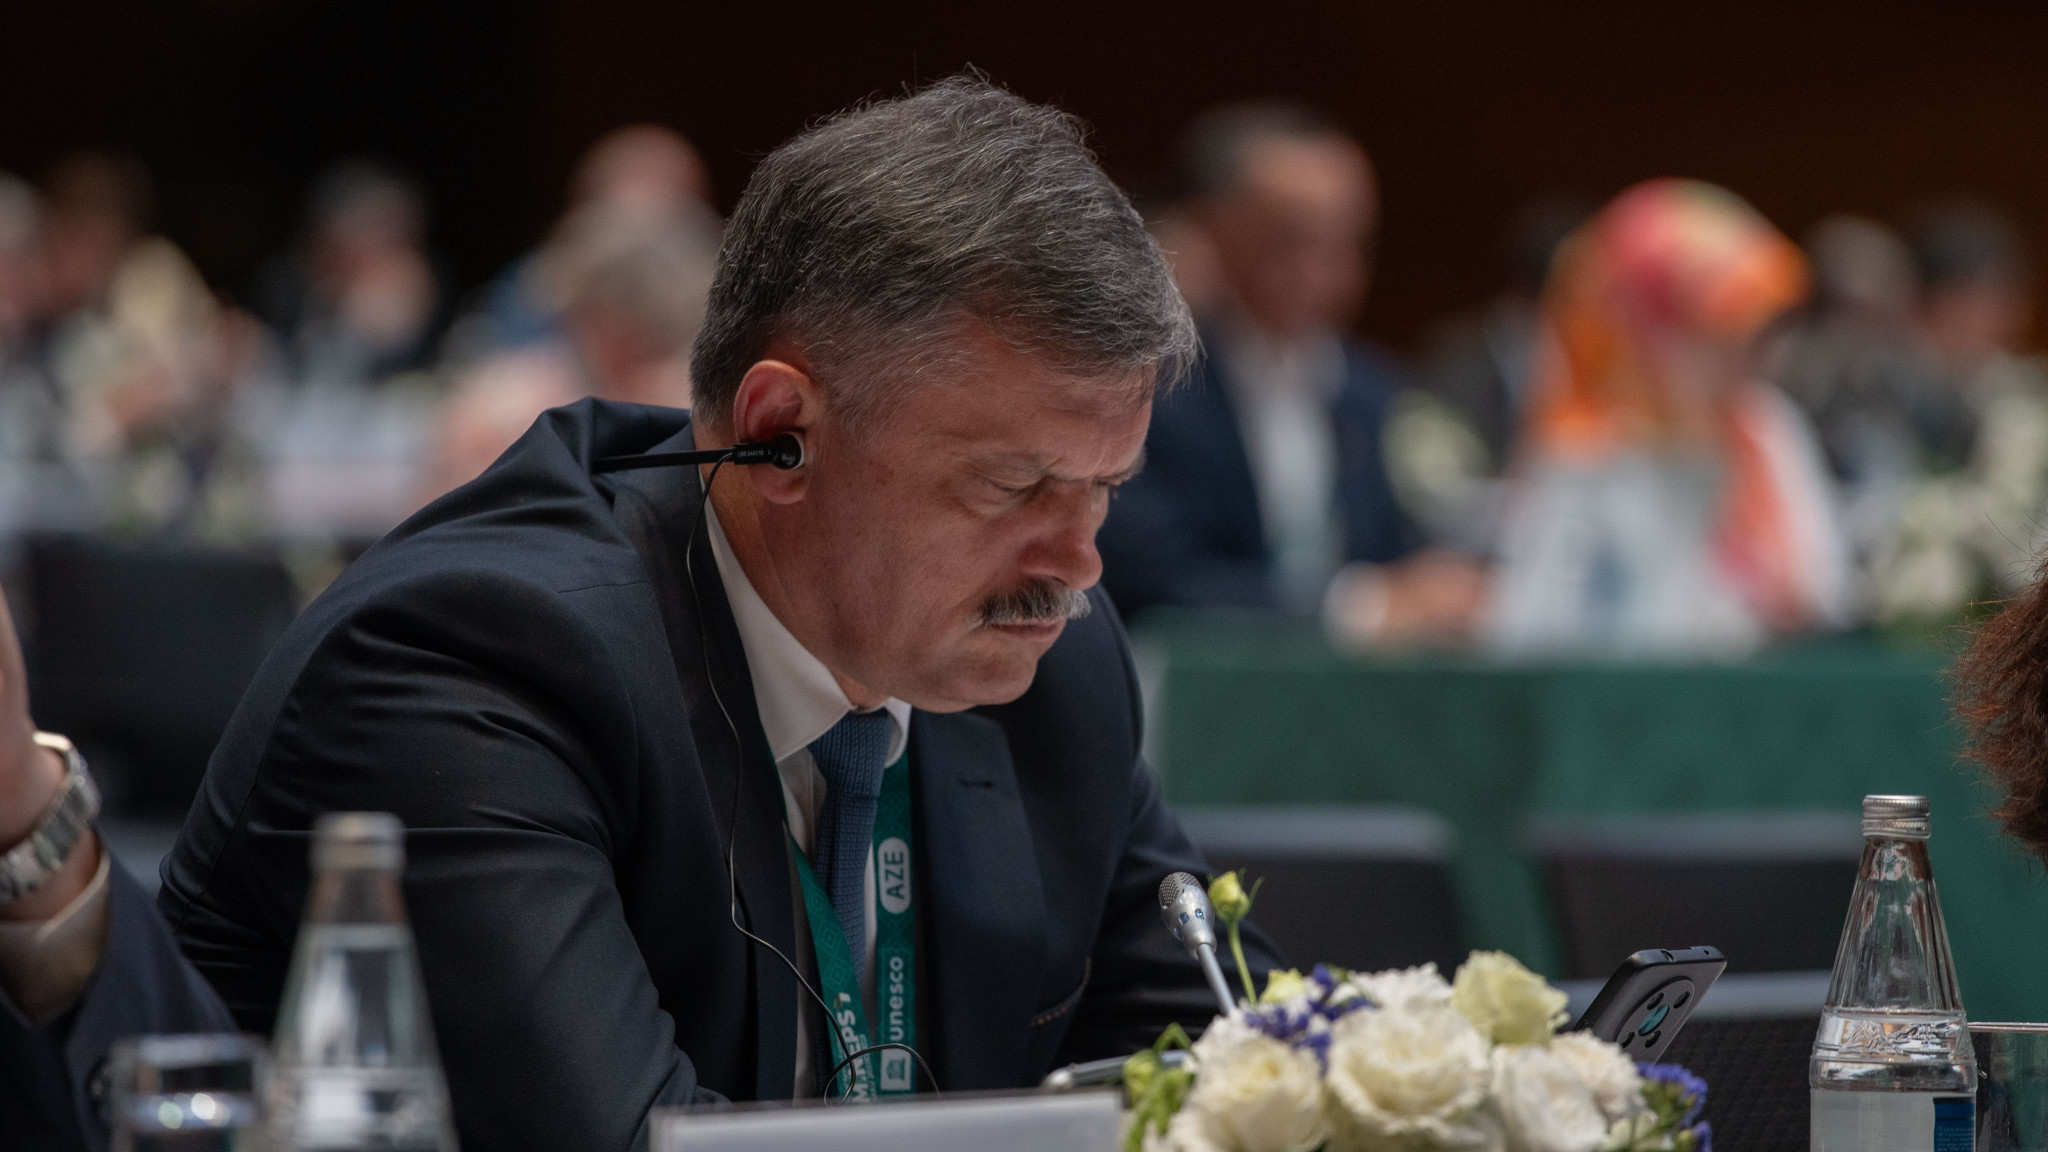 Belarusian Minister of Sport and Tourism Sergey Kovalchuk believes sport has "lost its appeal and…its independence" due to "unscrupulous politicians" ©MINEPS VII